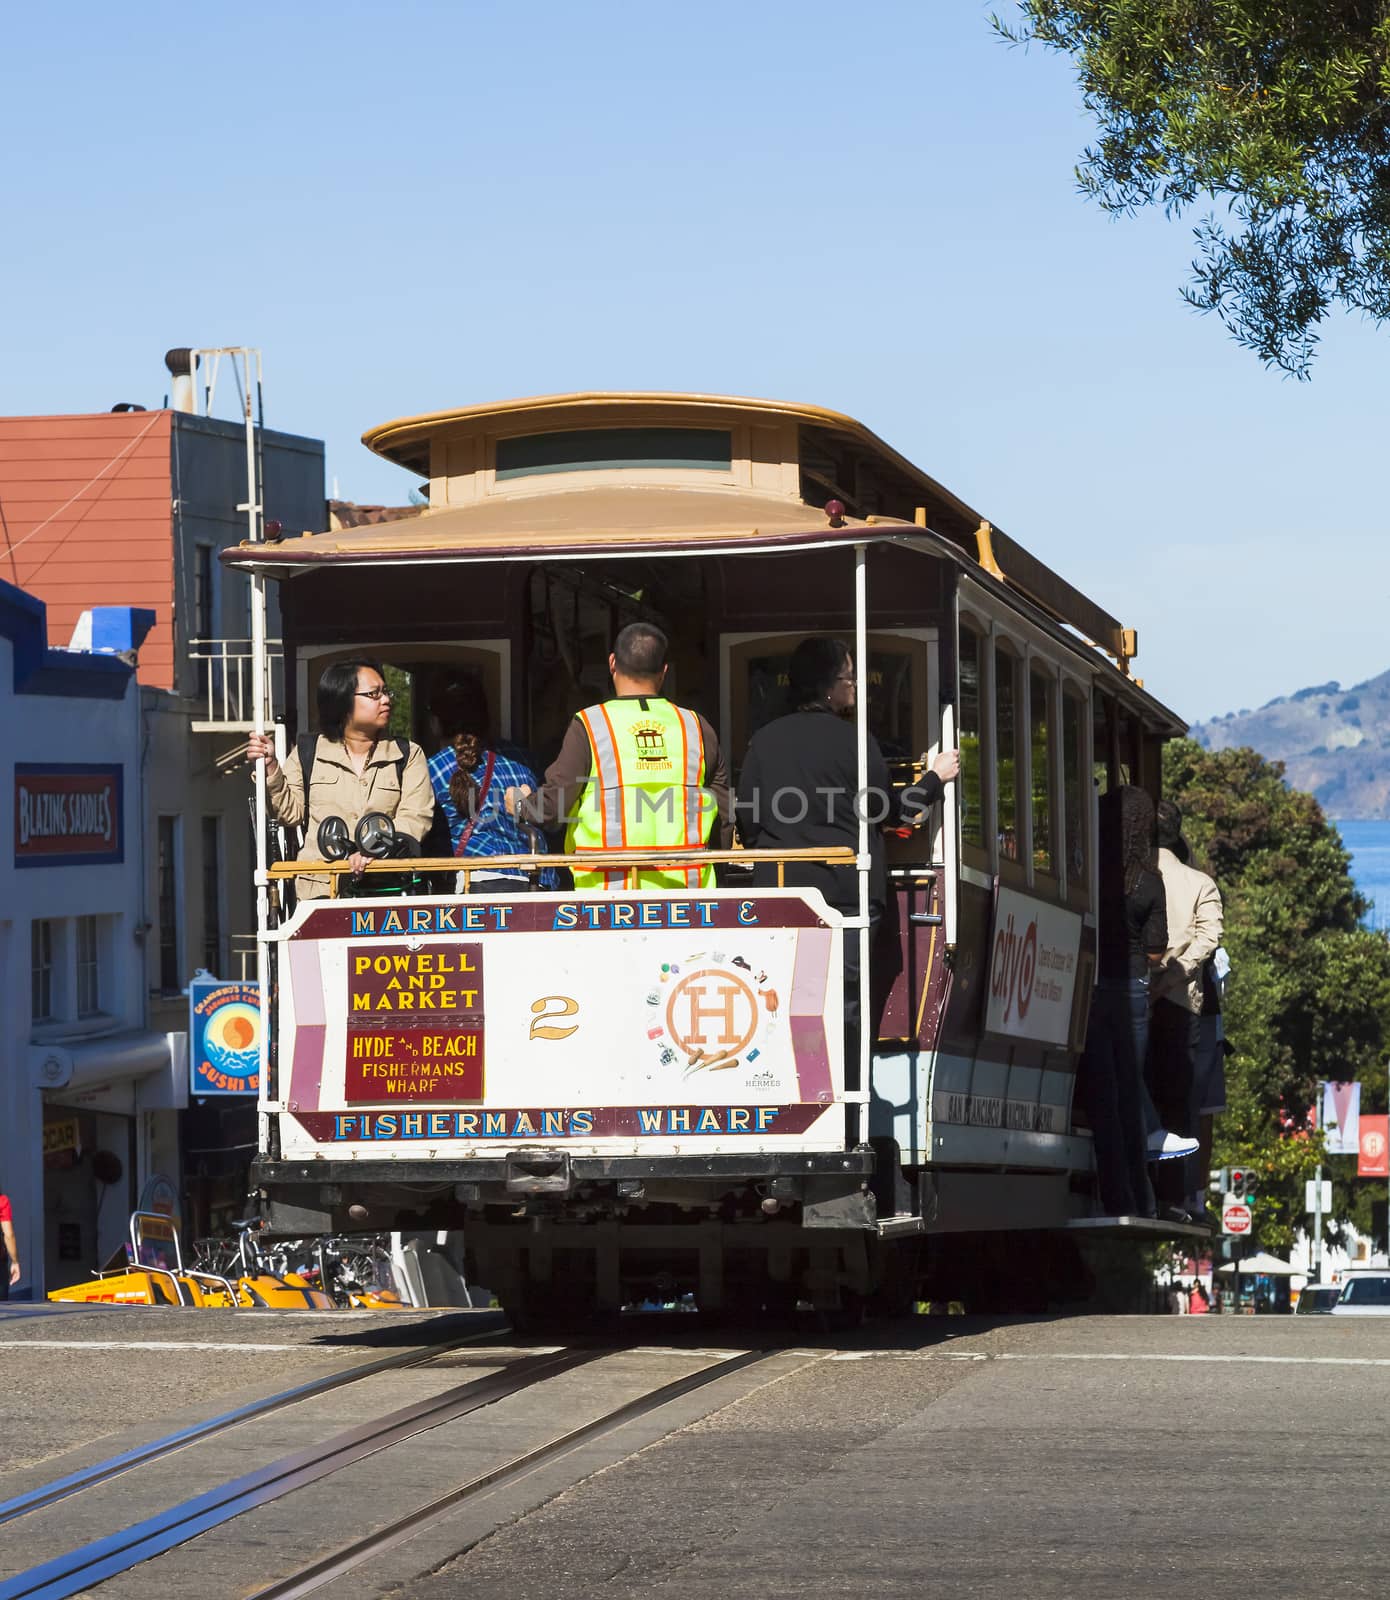 The San Francisco Cable car tram by hanusst